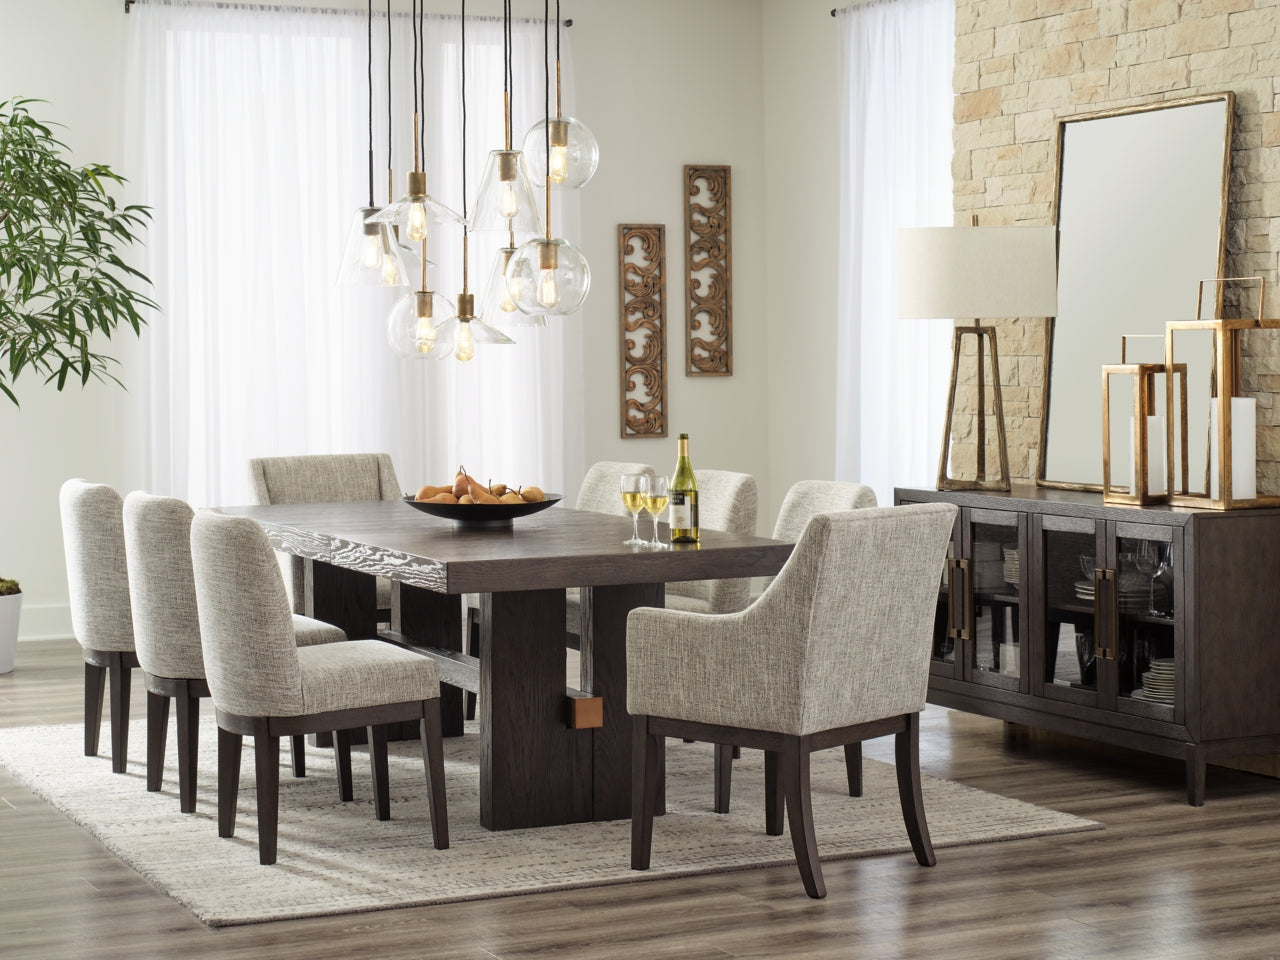 Burkhaus Dining Table and 8 Chairs with Storage - PKG013374 - furniture place usa